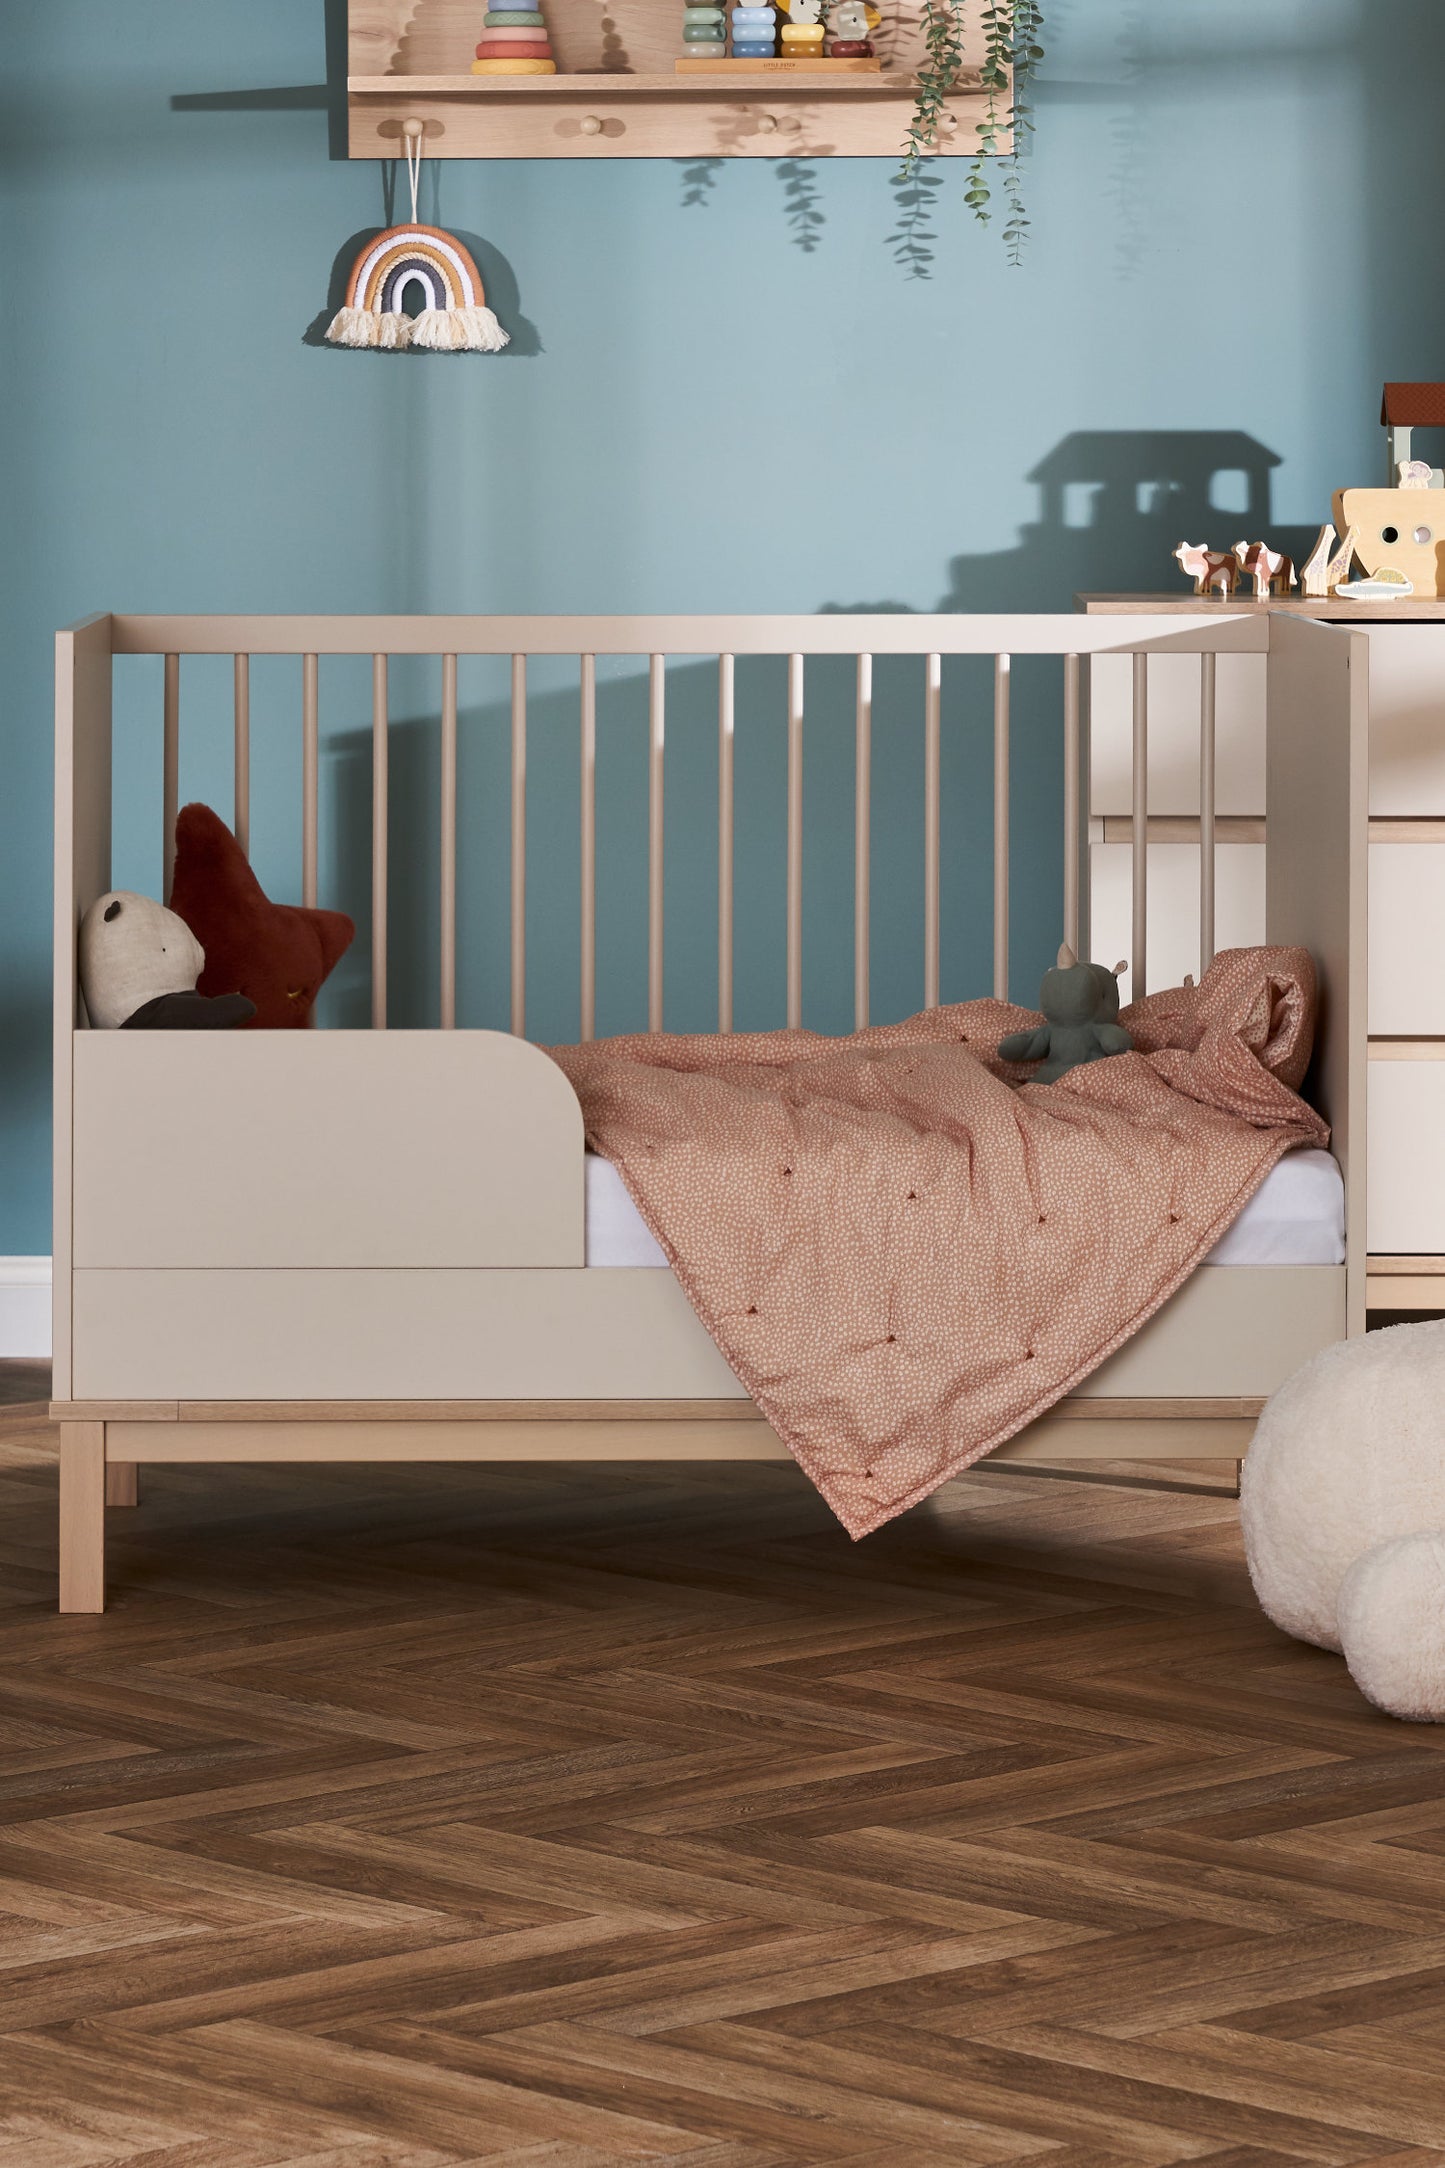 Obaby Astrid Mini Cot Bed